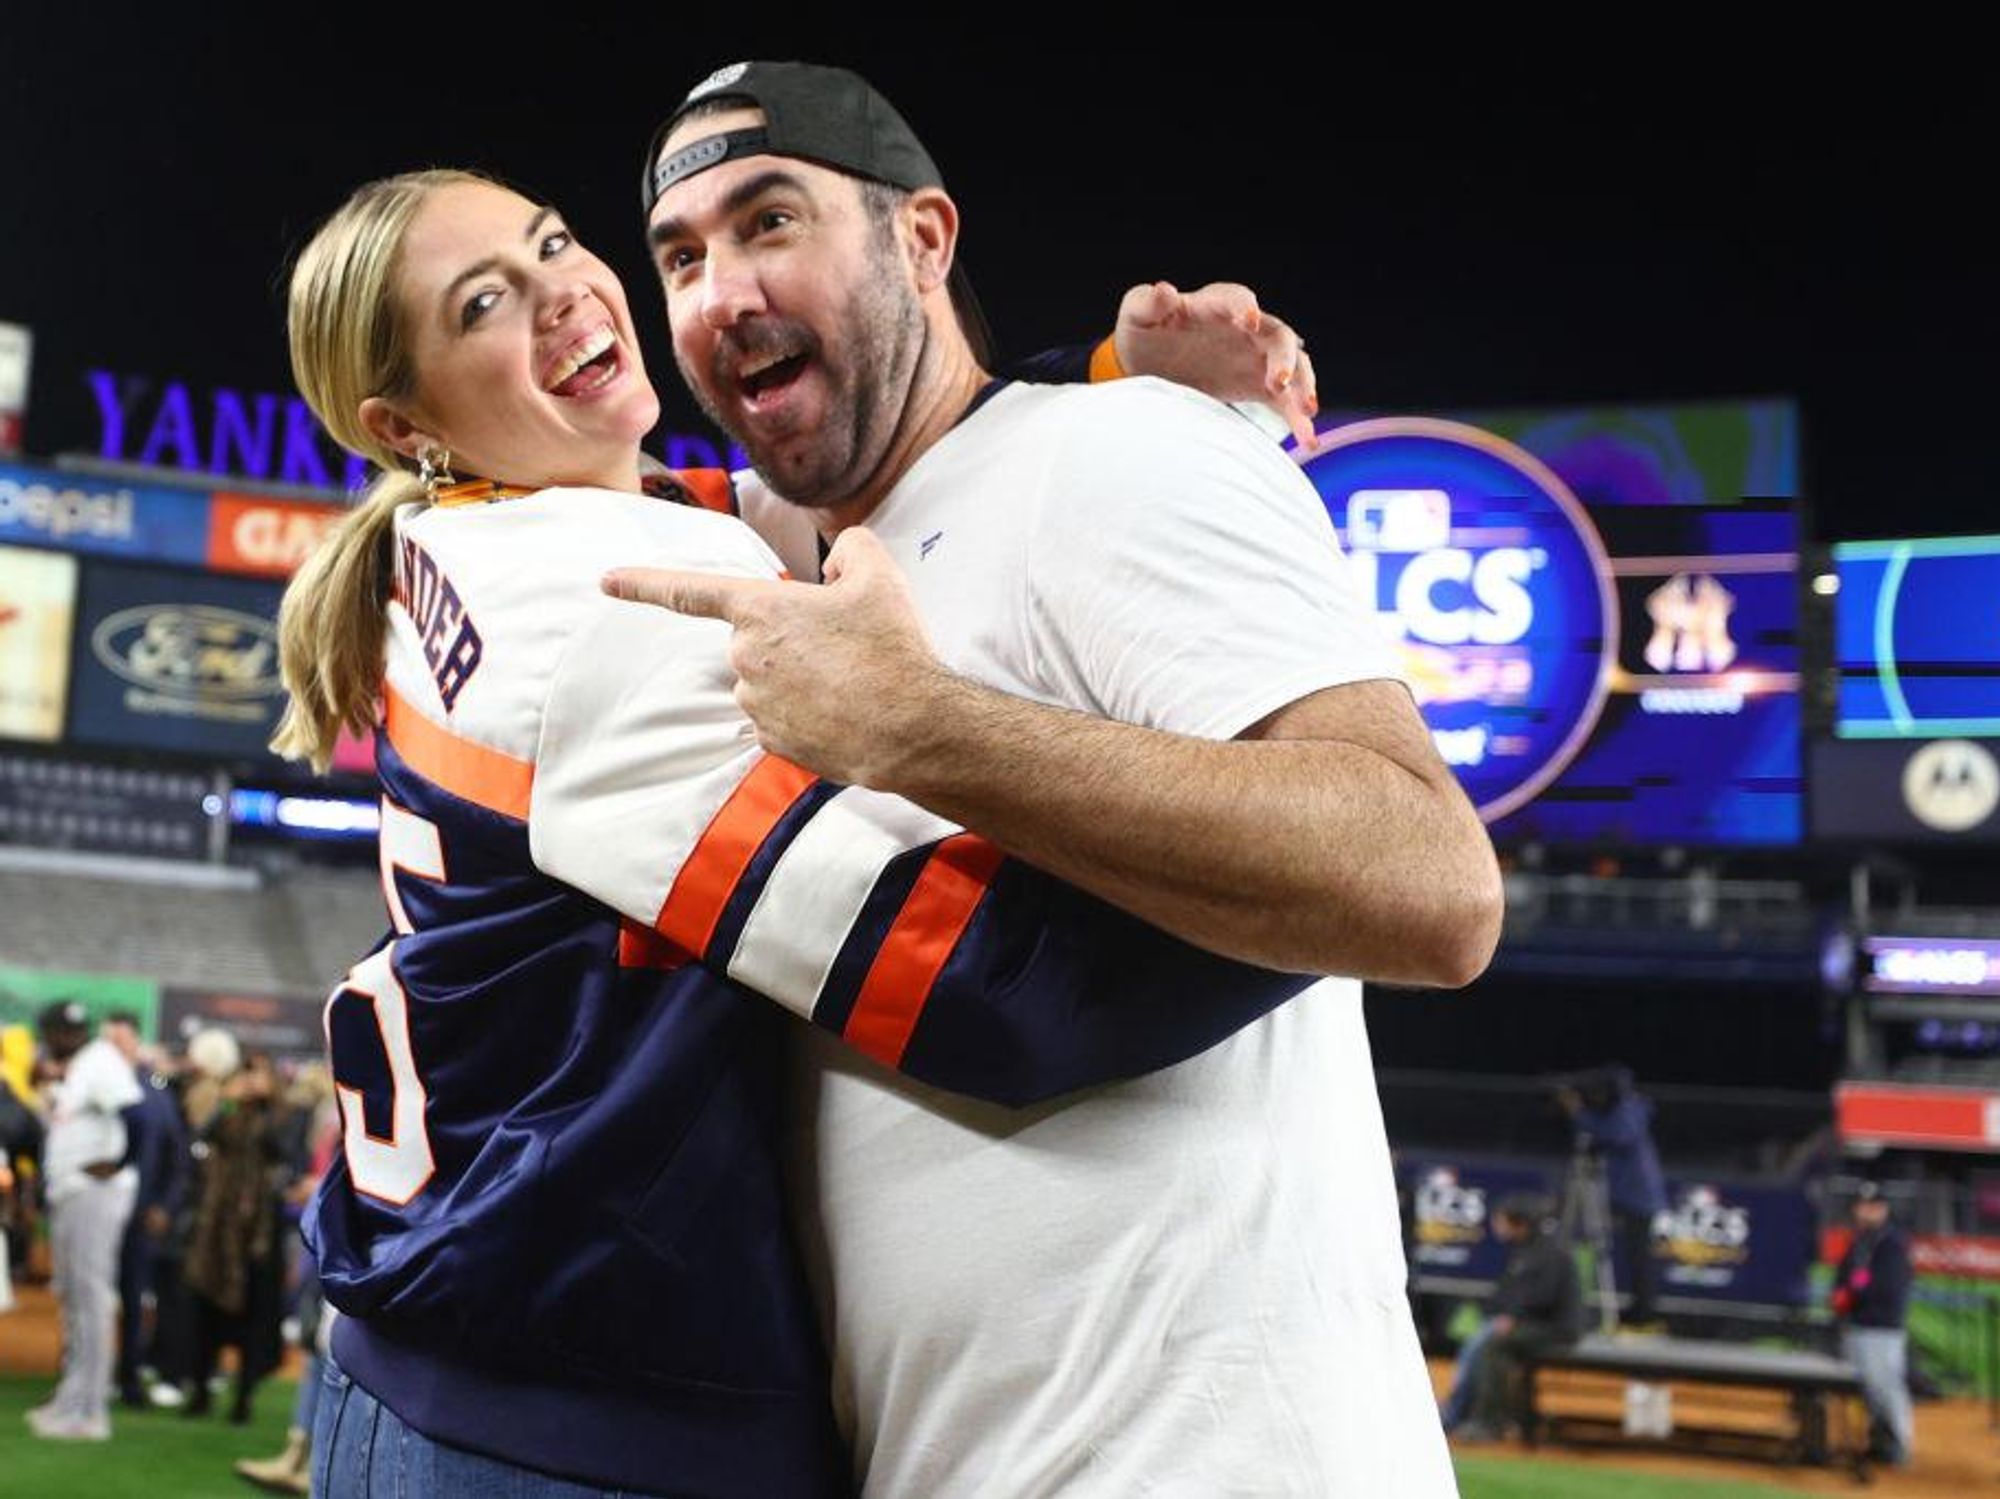 Justin Verlander Got Traded Back to the Astros and Everyone Made